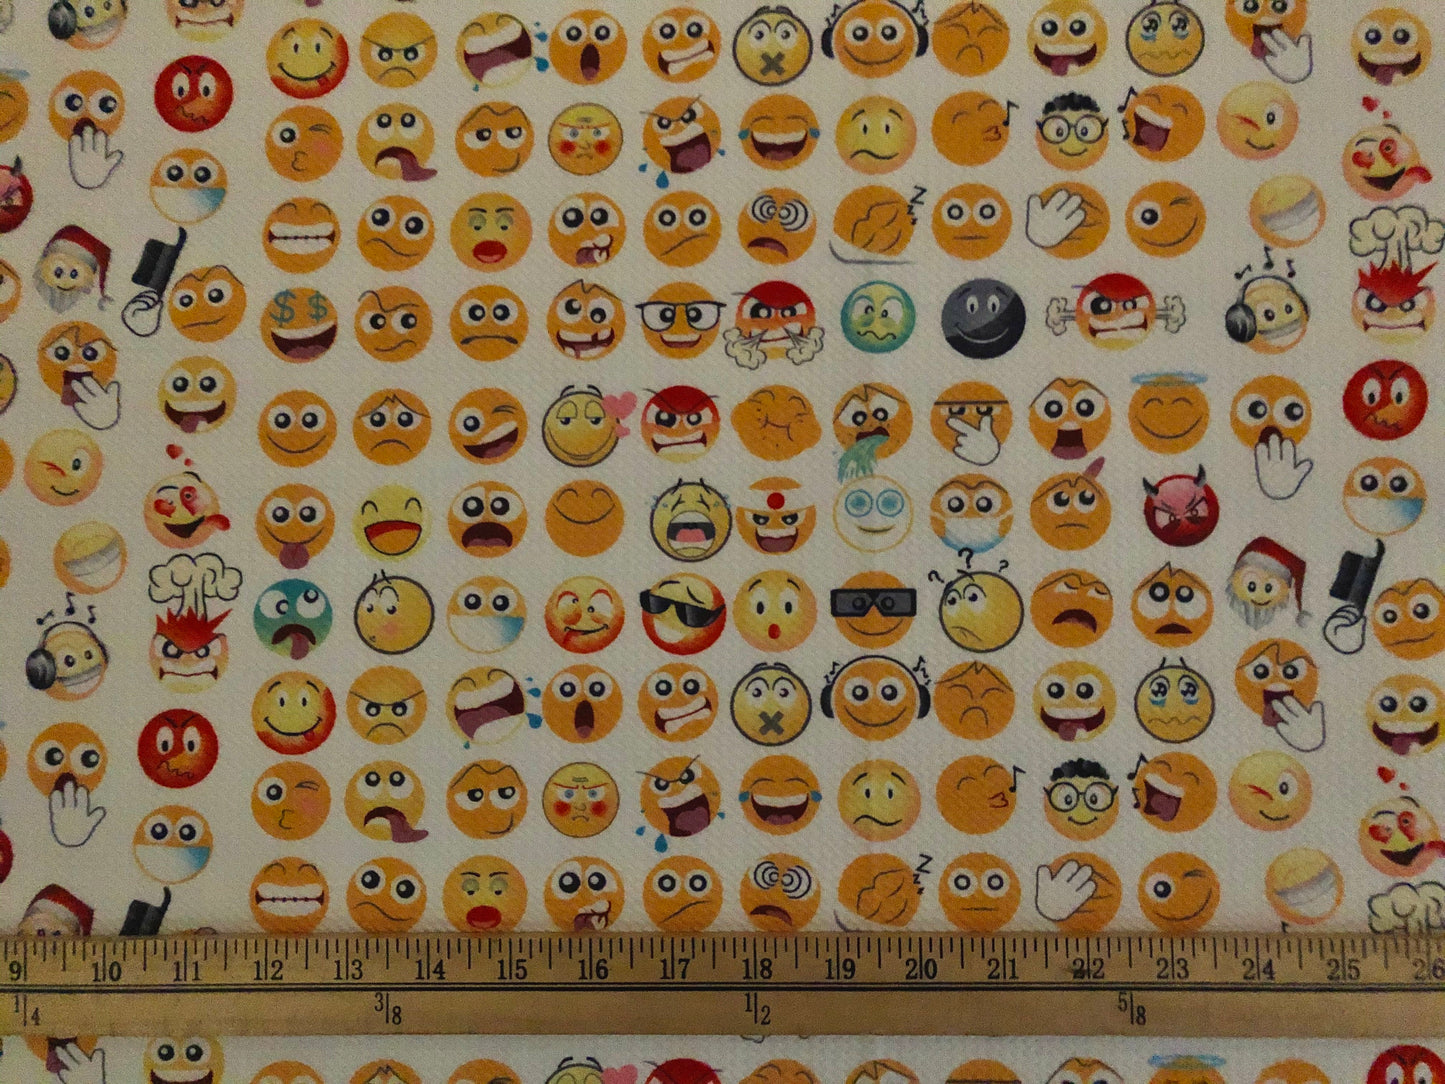 Bullet Print Fabric-Ivory Yellow Angry Faces Emojis-BPR146-Sold by the Yard-Bulk Available